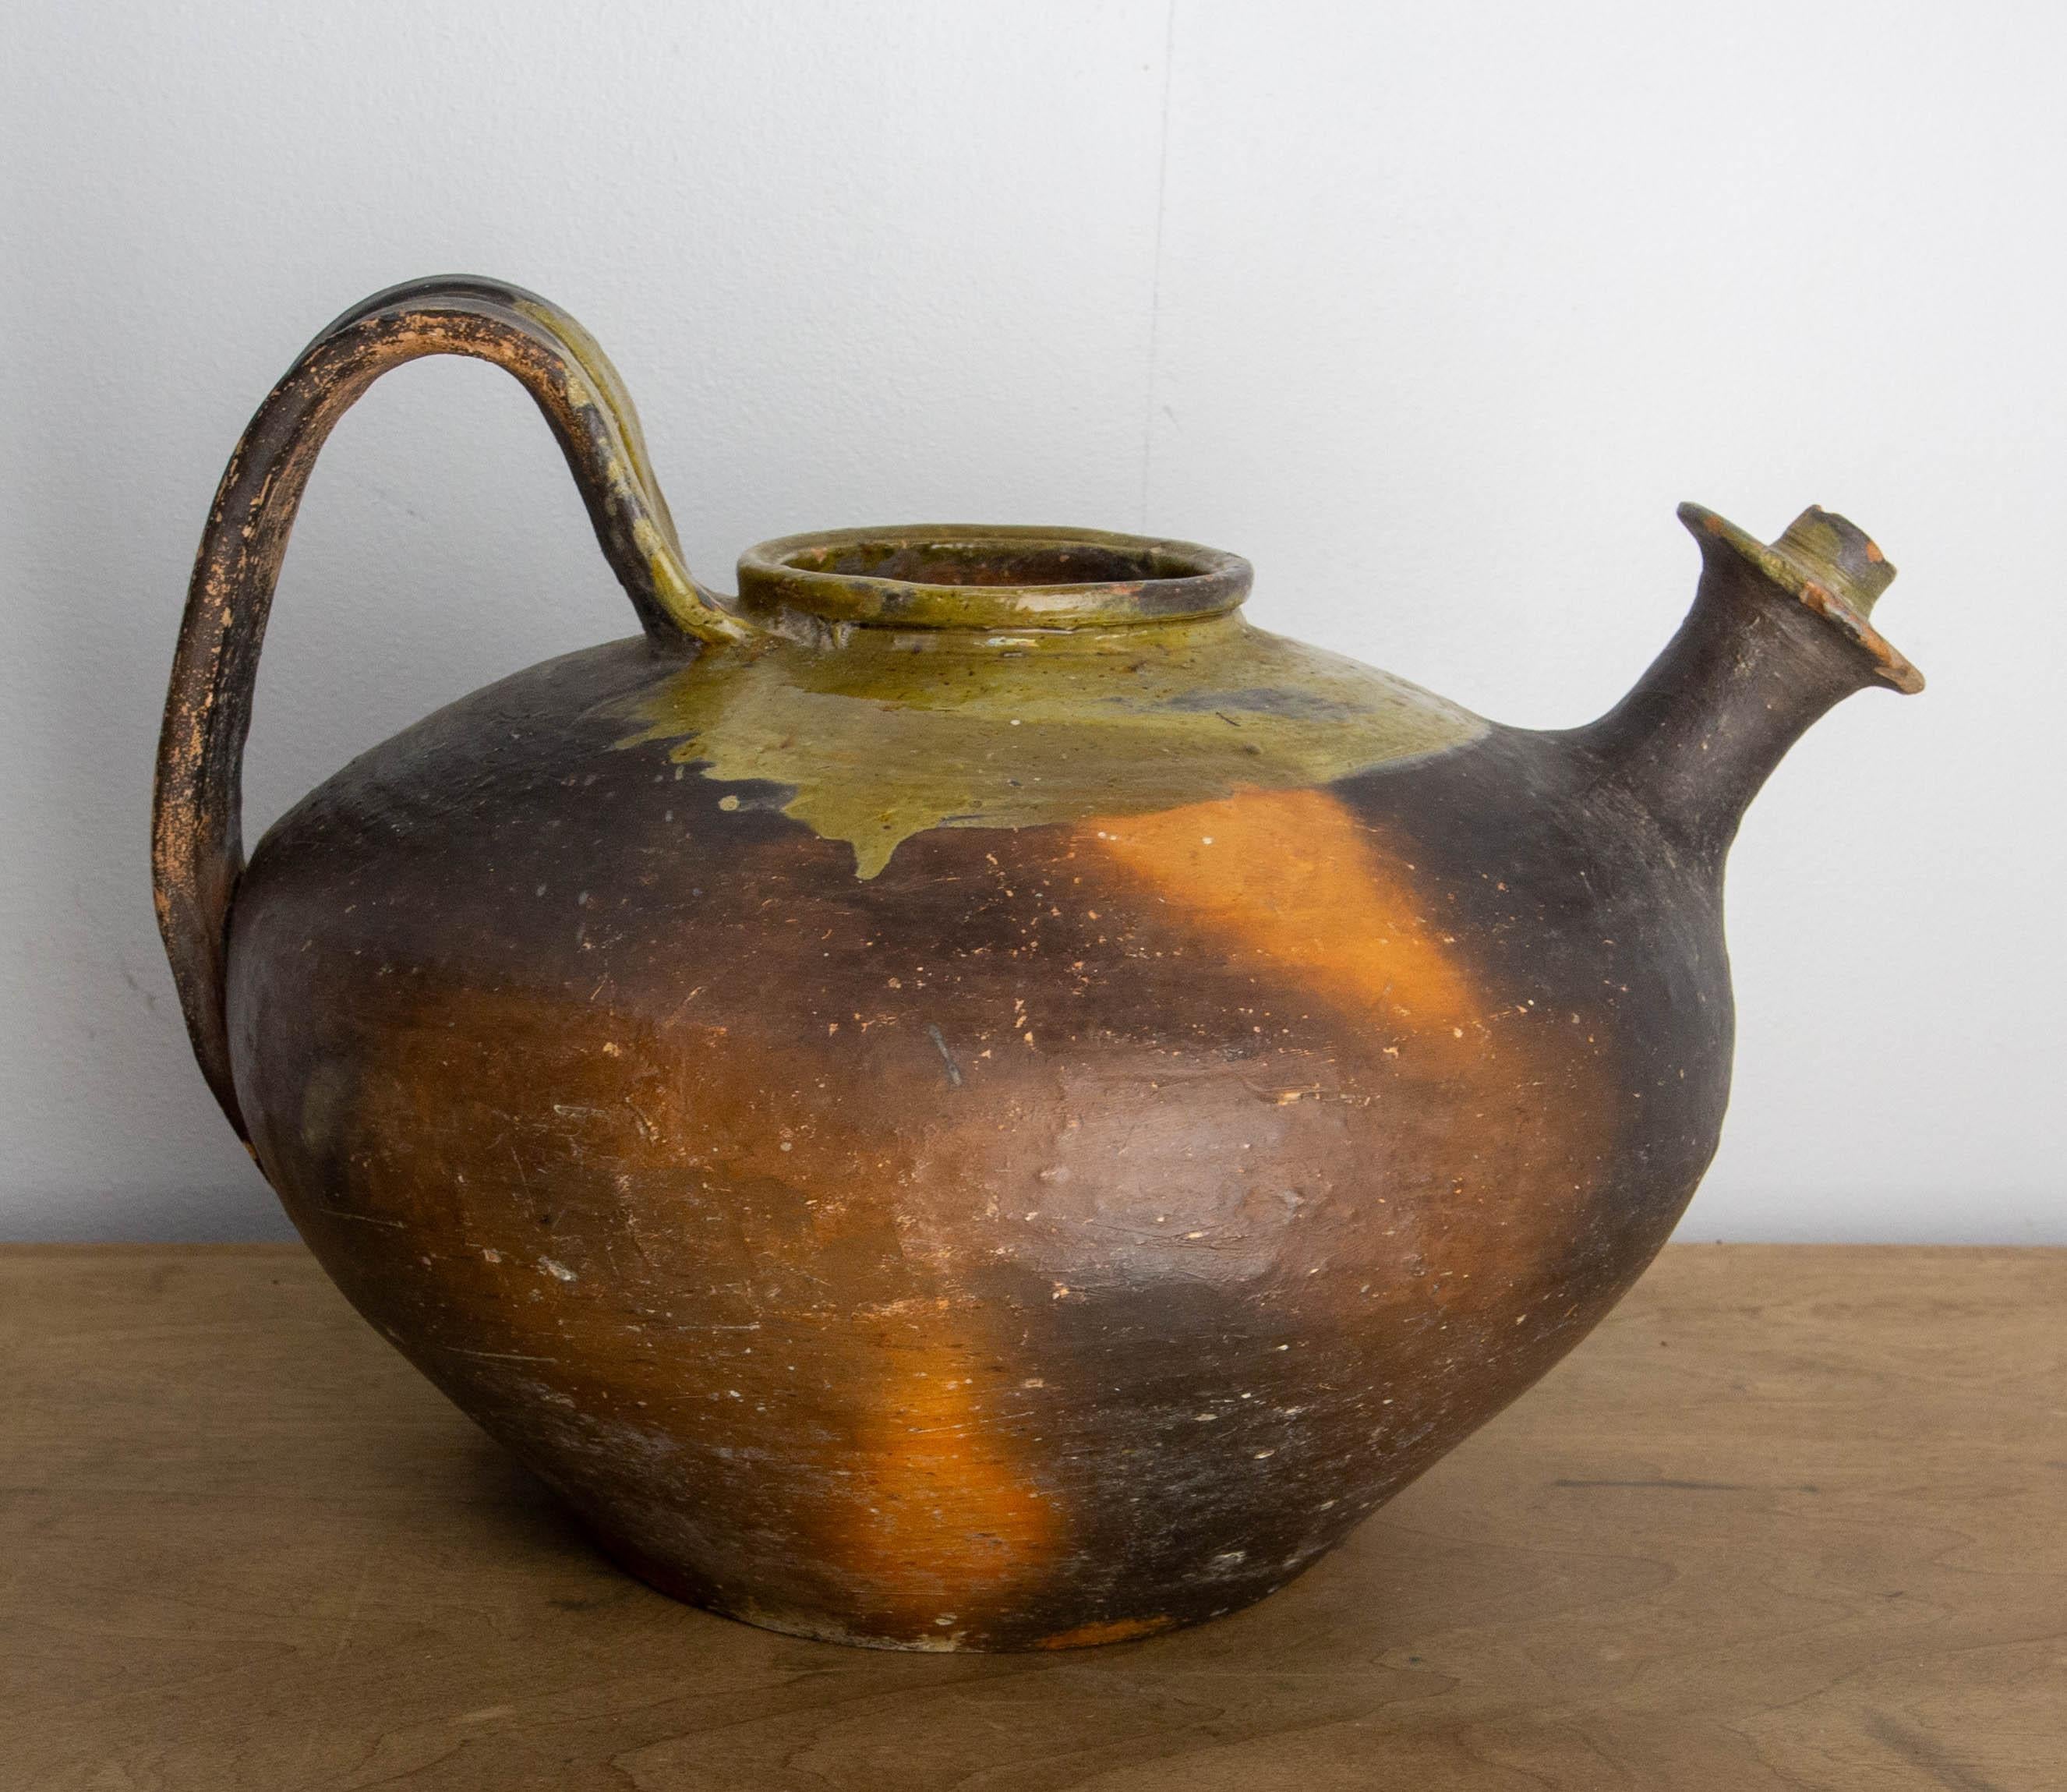 French terracotta from the 19th to the mid-20th century.
This kind of pitcher was used to keep the well water cool.
This jug kept the marks of the fire when it was put in the oven to bake the earth. This gives very authentical and aesthetic nuances